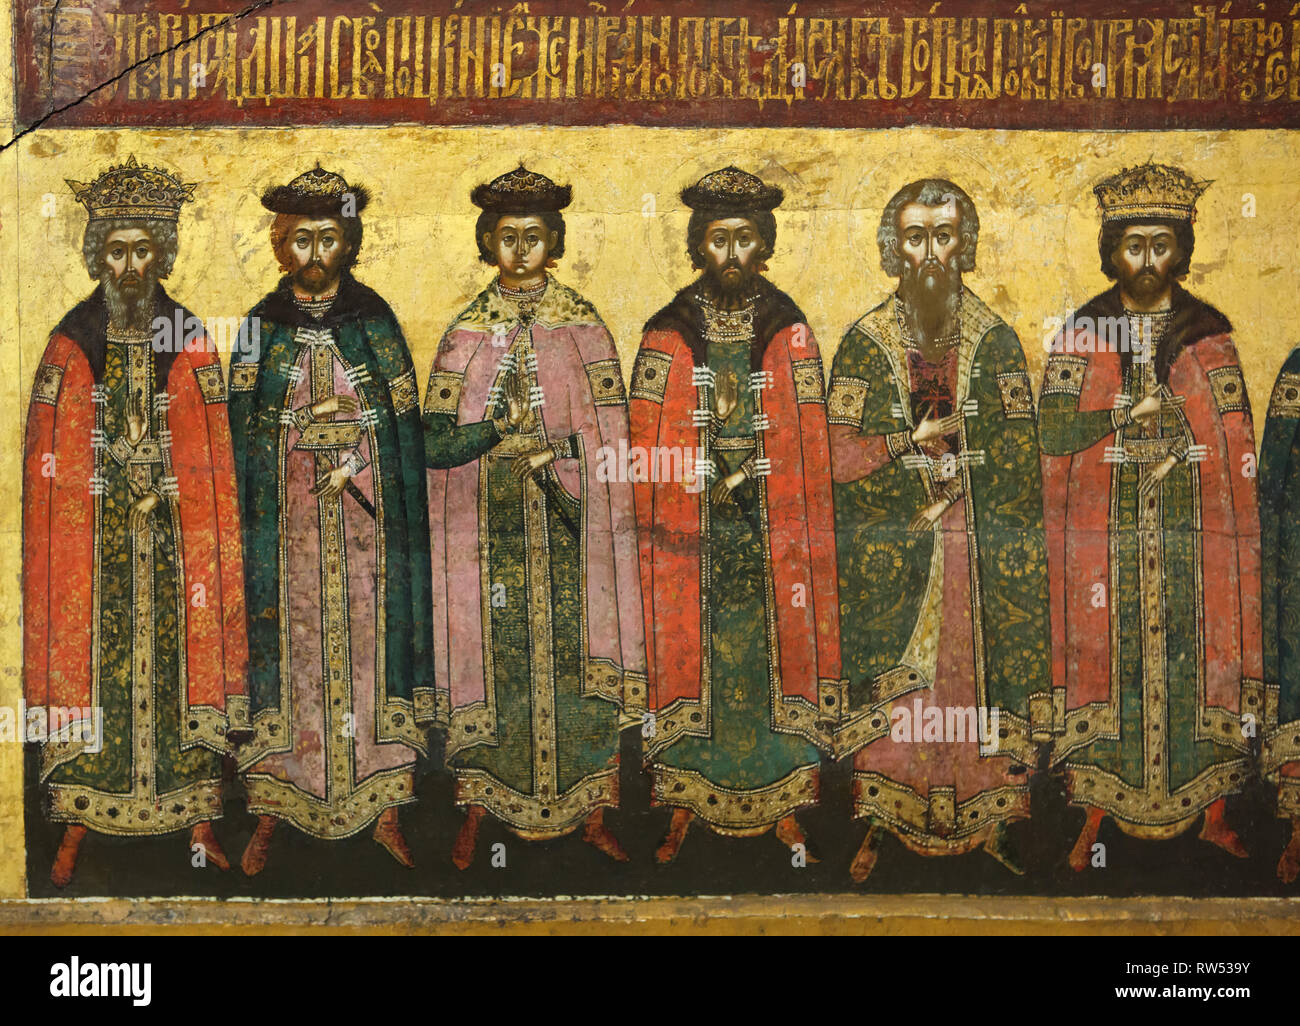 Saint Vladimir the Great, Saints Boris and Gleb, Saint Michael of Chernigov and his boyar Fedor (Saint Theodore) and Saint George of Vladimir (from left to right) depicted in the detail of the Russian icon of the Yaroslavl icon painting school dated from the 1640s from the Dormition Cathedral in Yaroslavl, now on display in the Yaroslavl Museum Preserve in Yaroslavl, Russia. Stock Photo